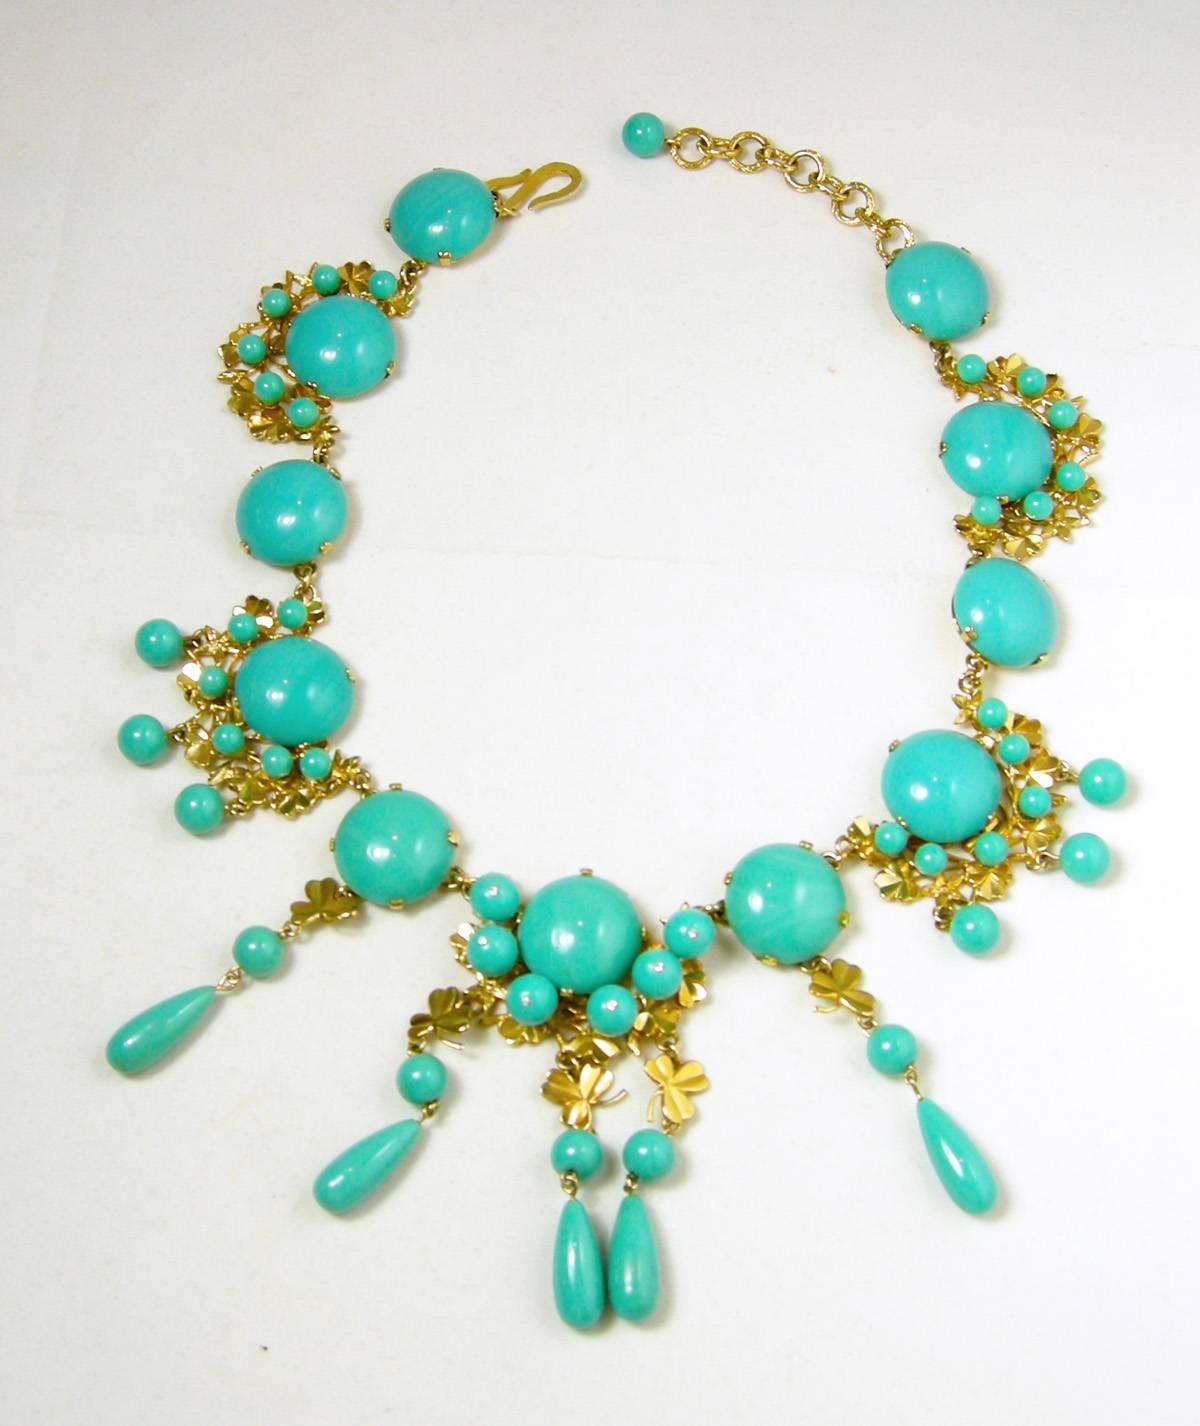 What a beautiful Christian Dior necklace designed with faux turquoise circles streaming downward.  The turquoise circles alternates with more circles surrounded with small turquoise glass beads resting on a gold tone decorative setting.  The design